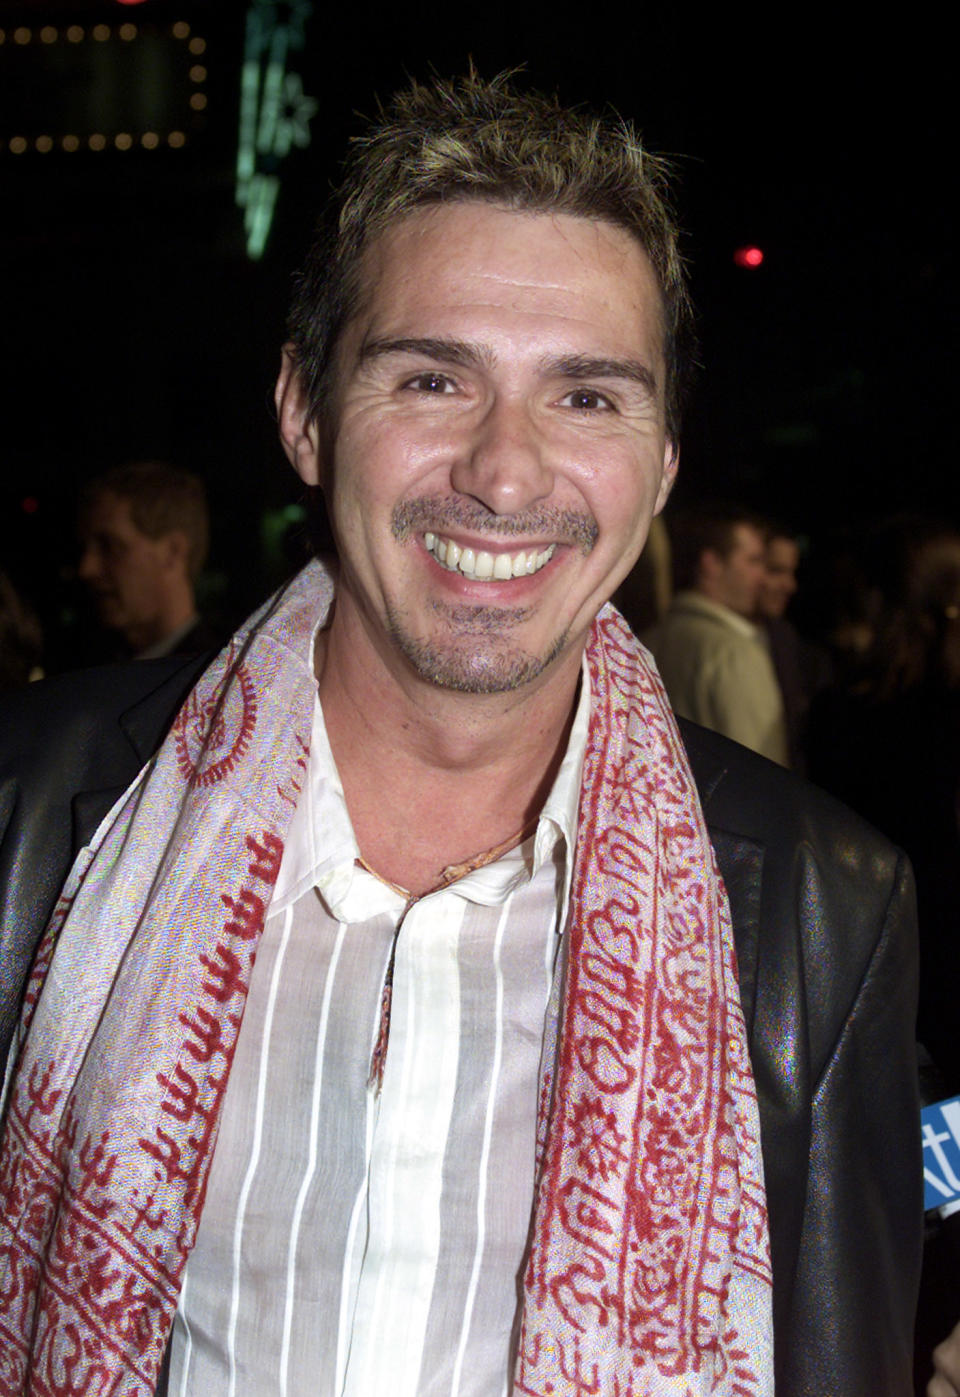 Actor Pedro Damian poses for photographs while arriving to the premiere
of 